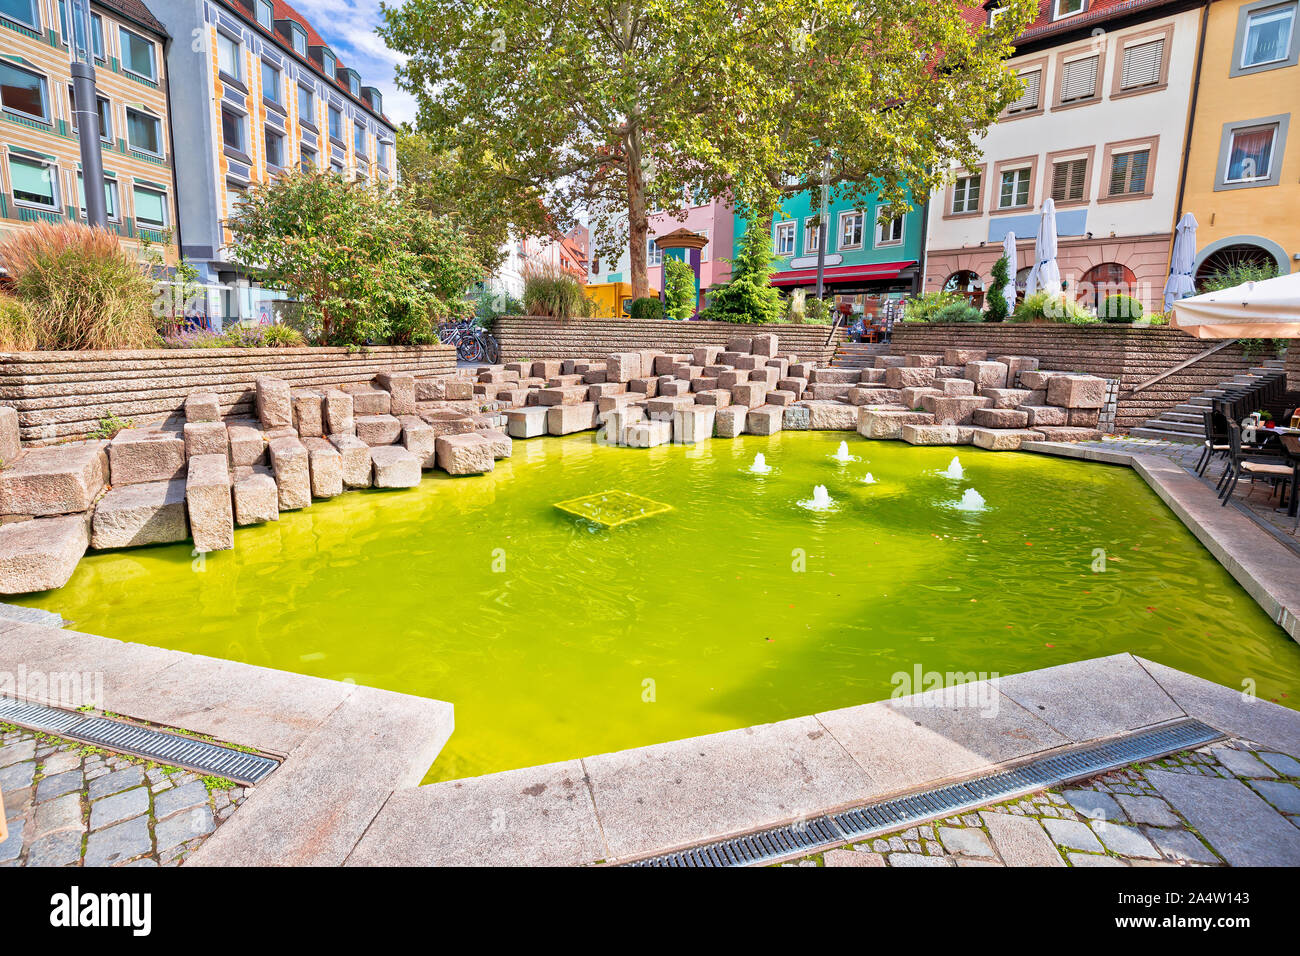 Bamberg. Colorful green fountain pond in historic town of Bamberg, Upper Franconia, Bavaria region of Germany Stock Photo